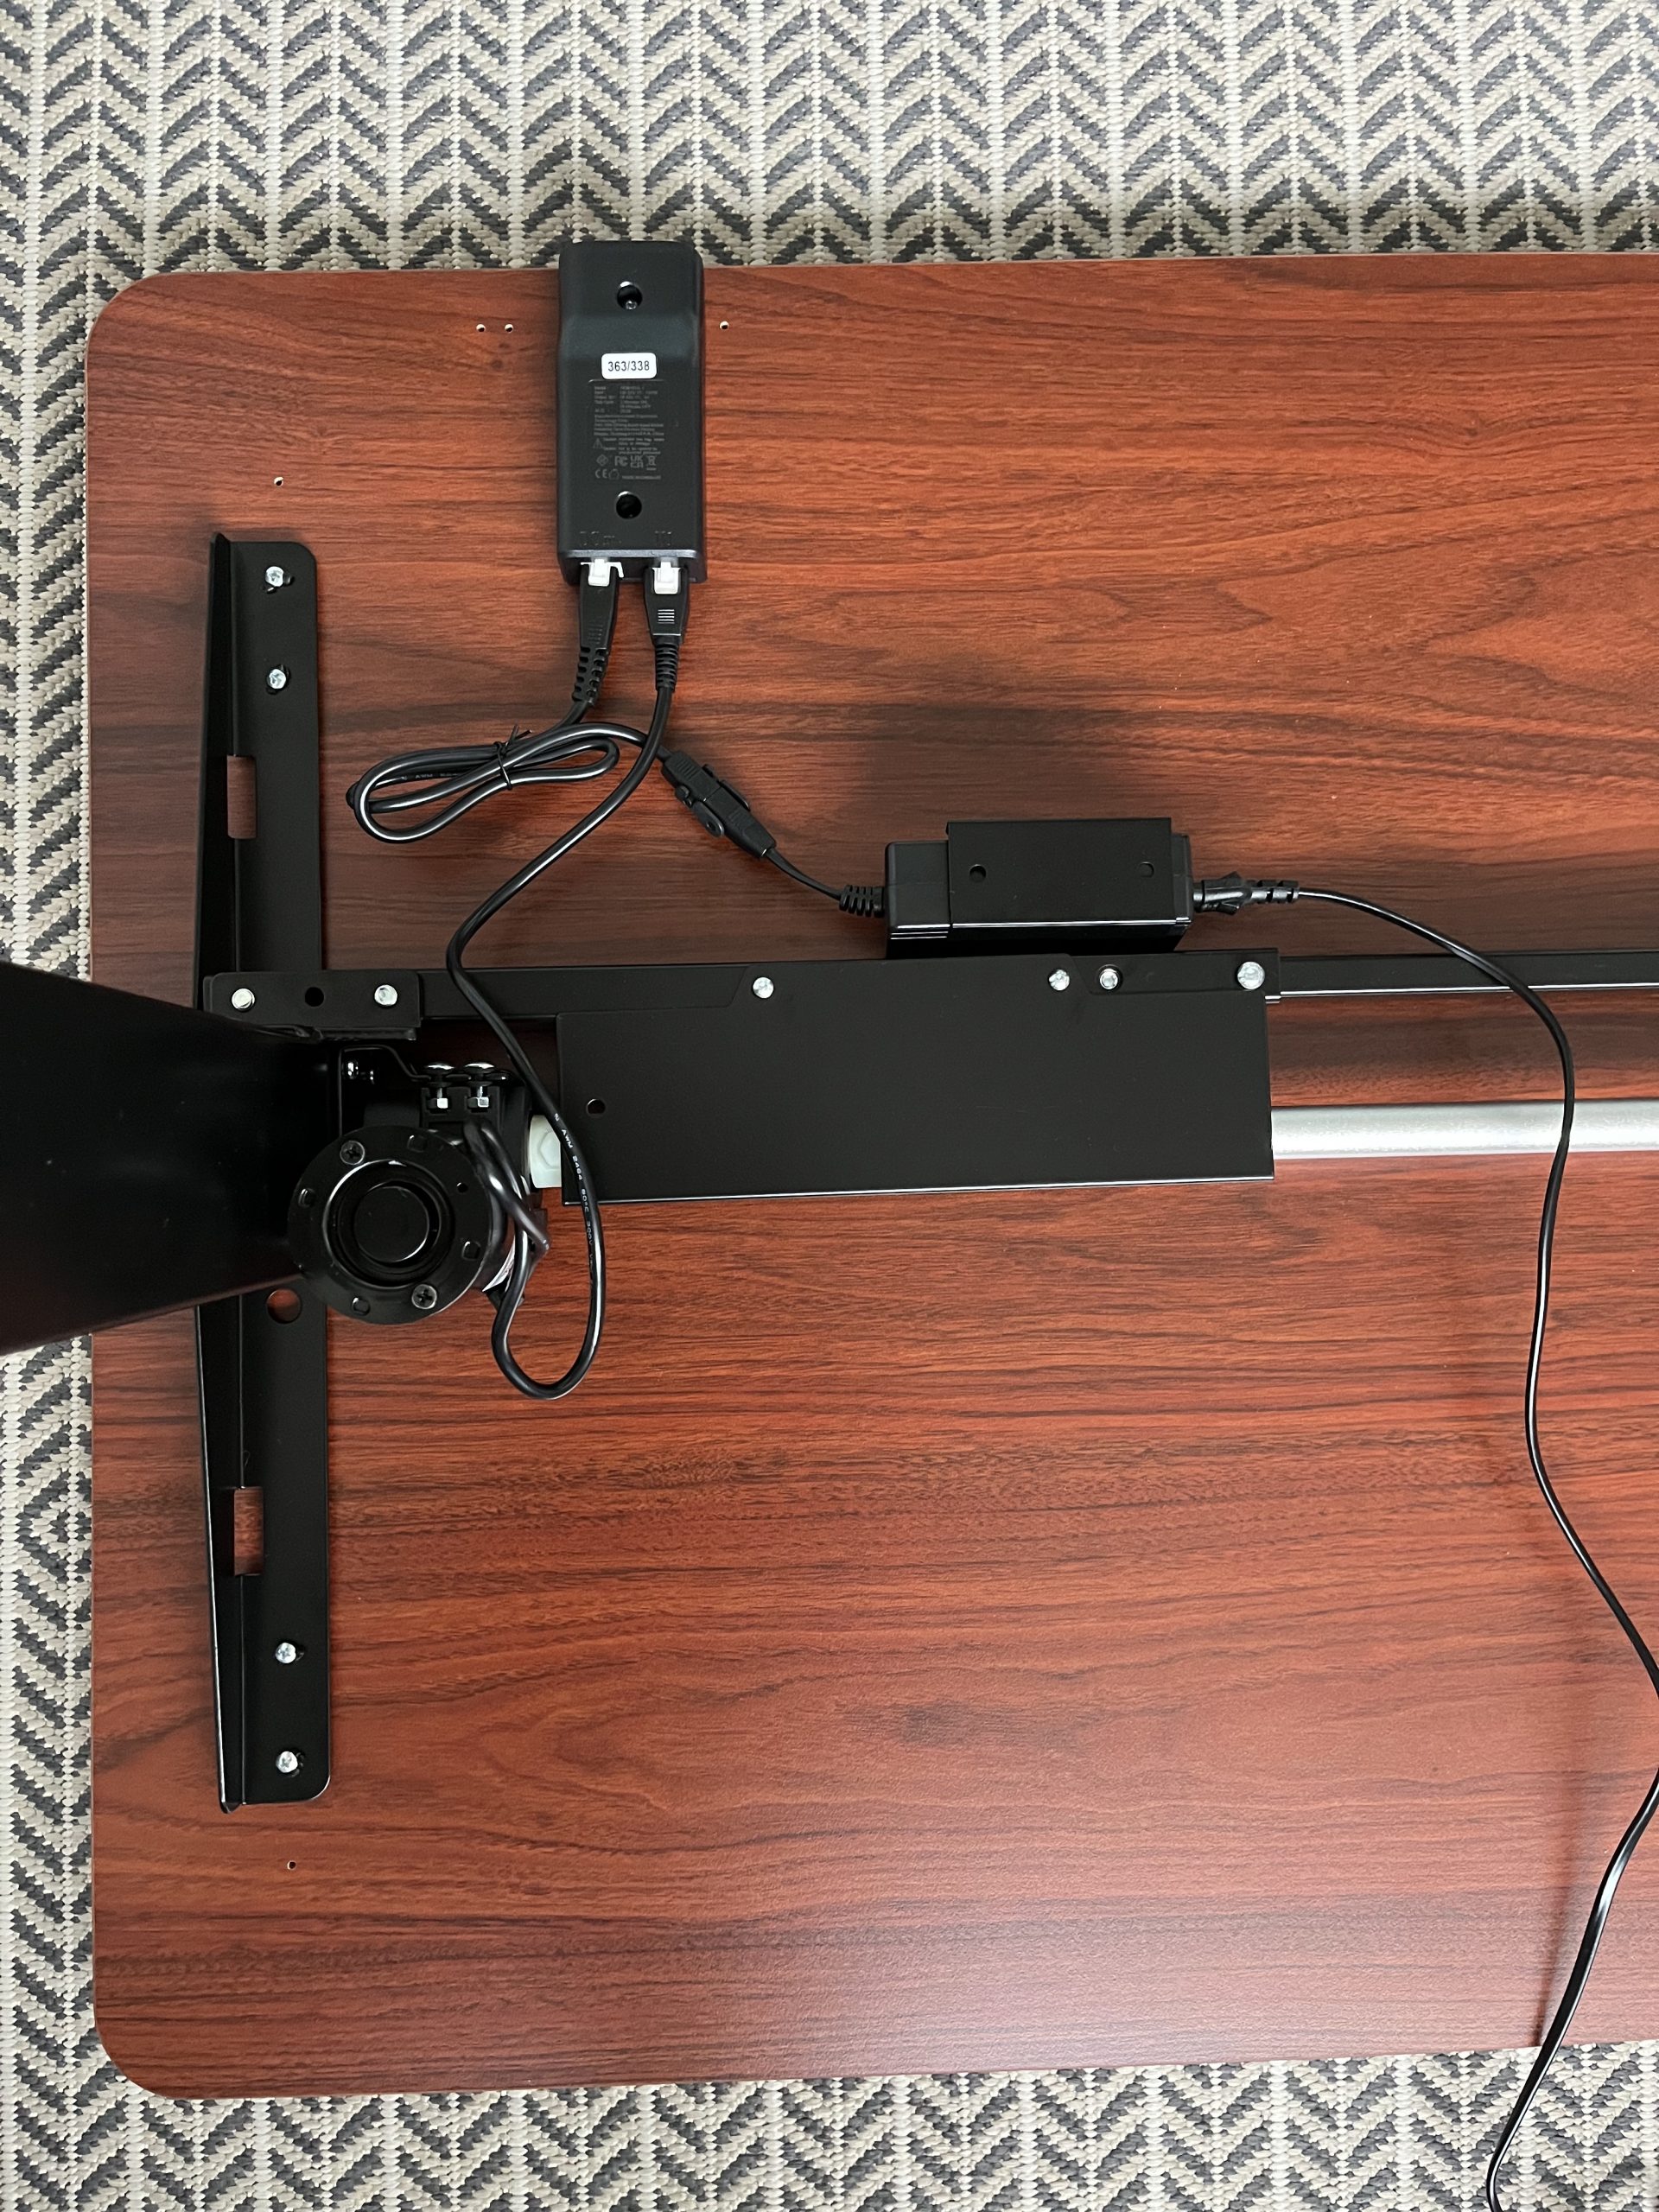 Adding the up and down button for the standing desk